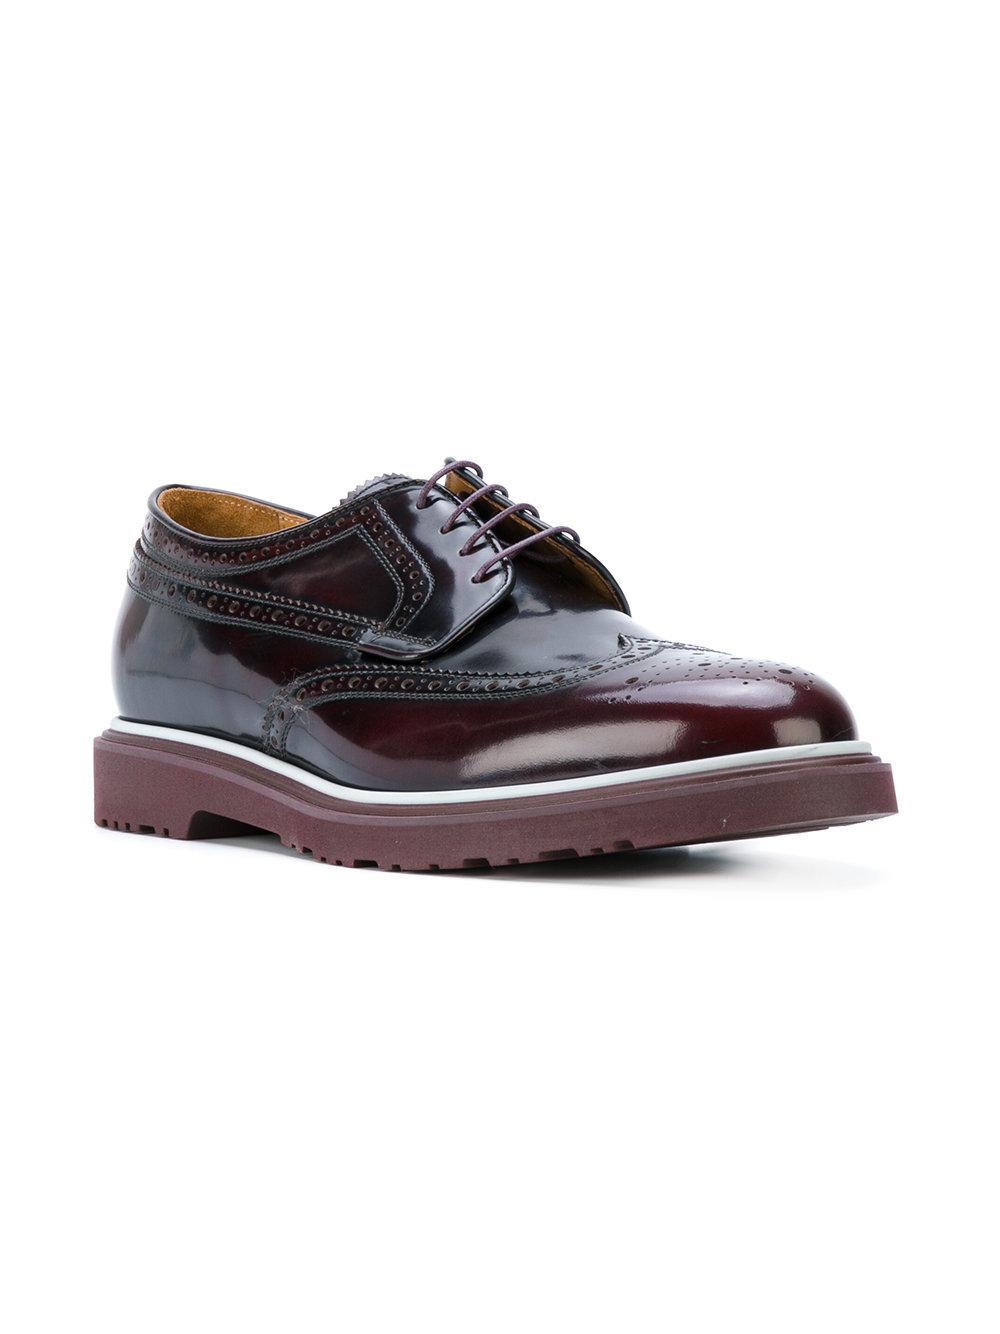 Paul Smith High Shine Crispin Brogues in Brown for Men | Lyst